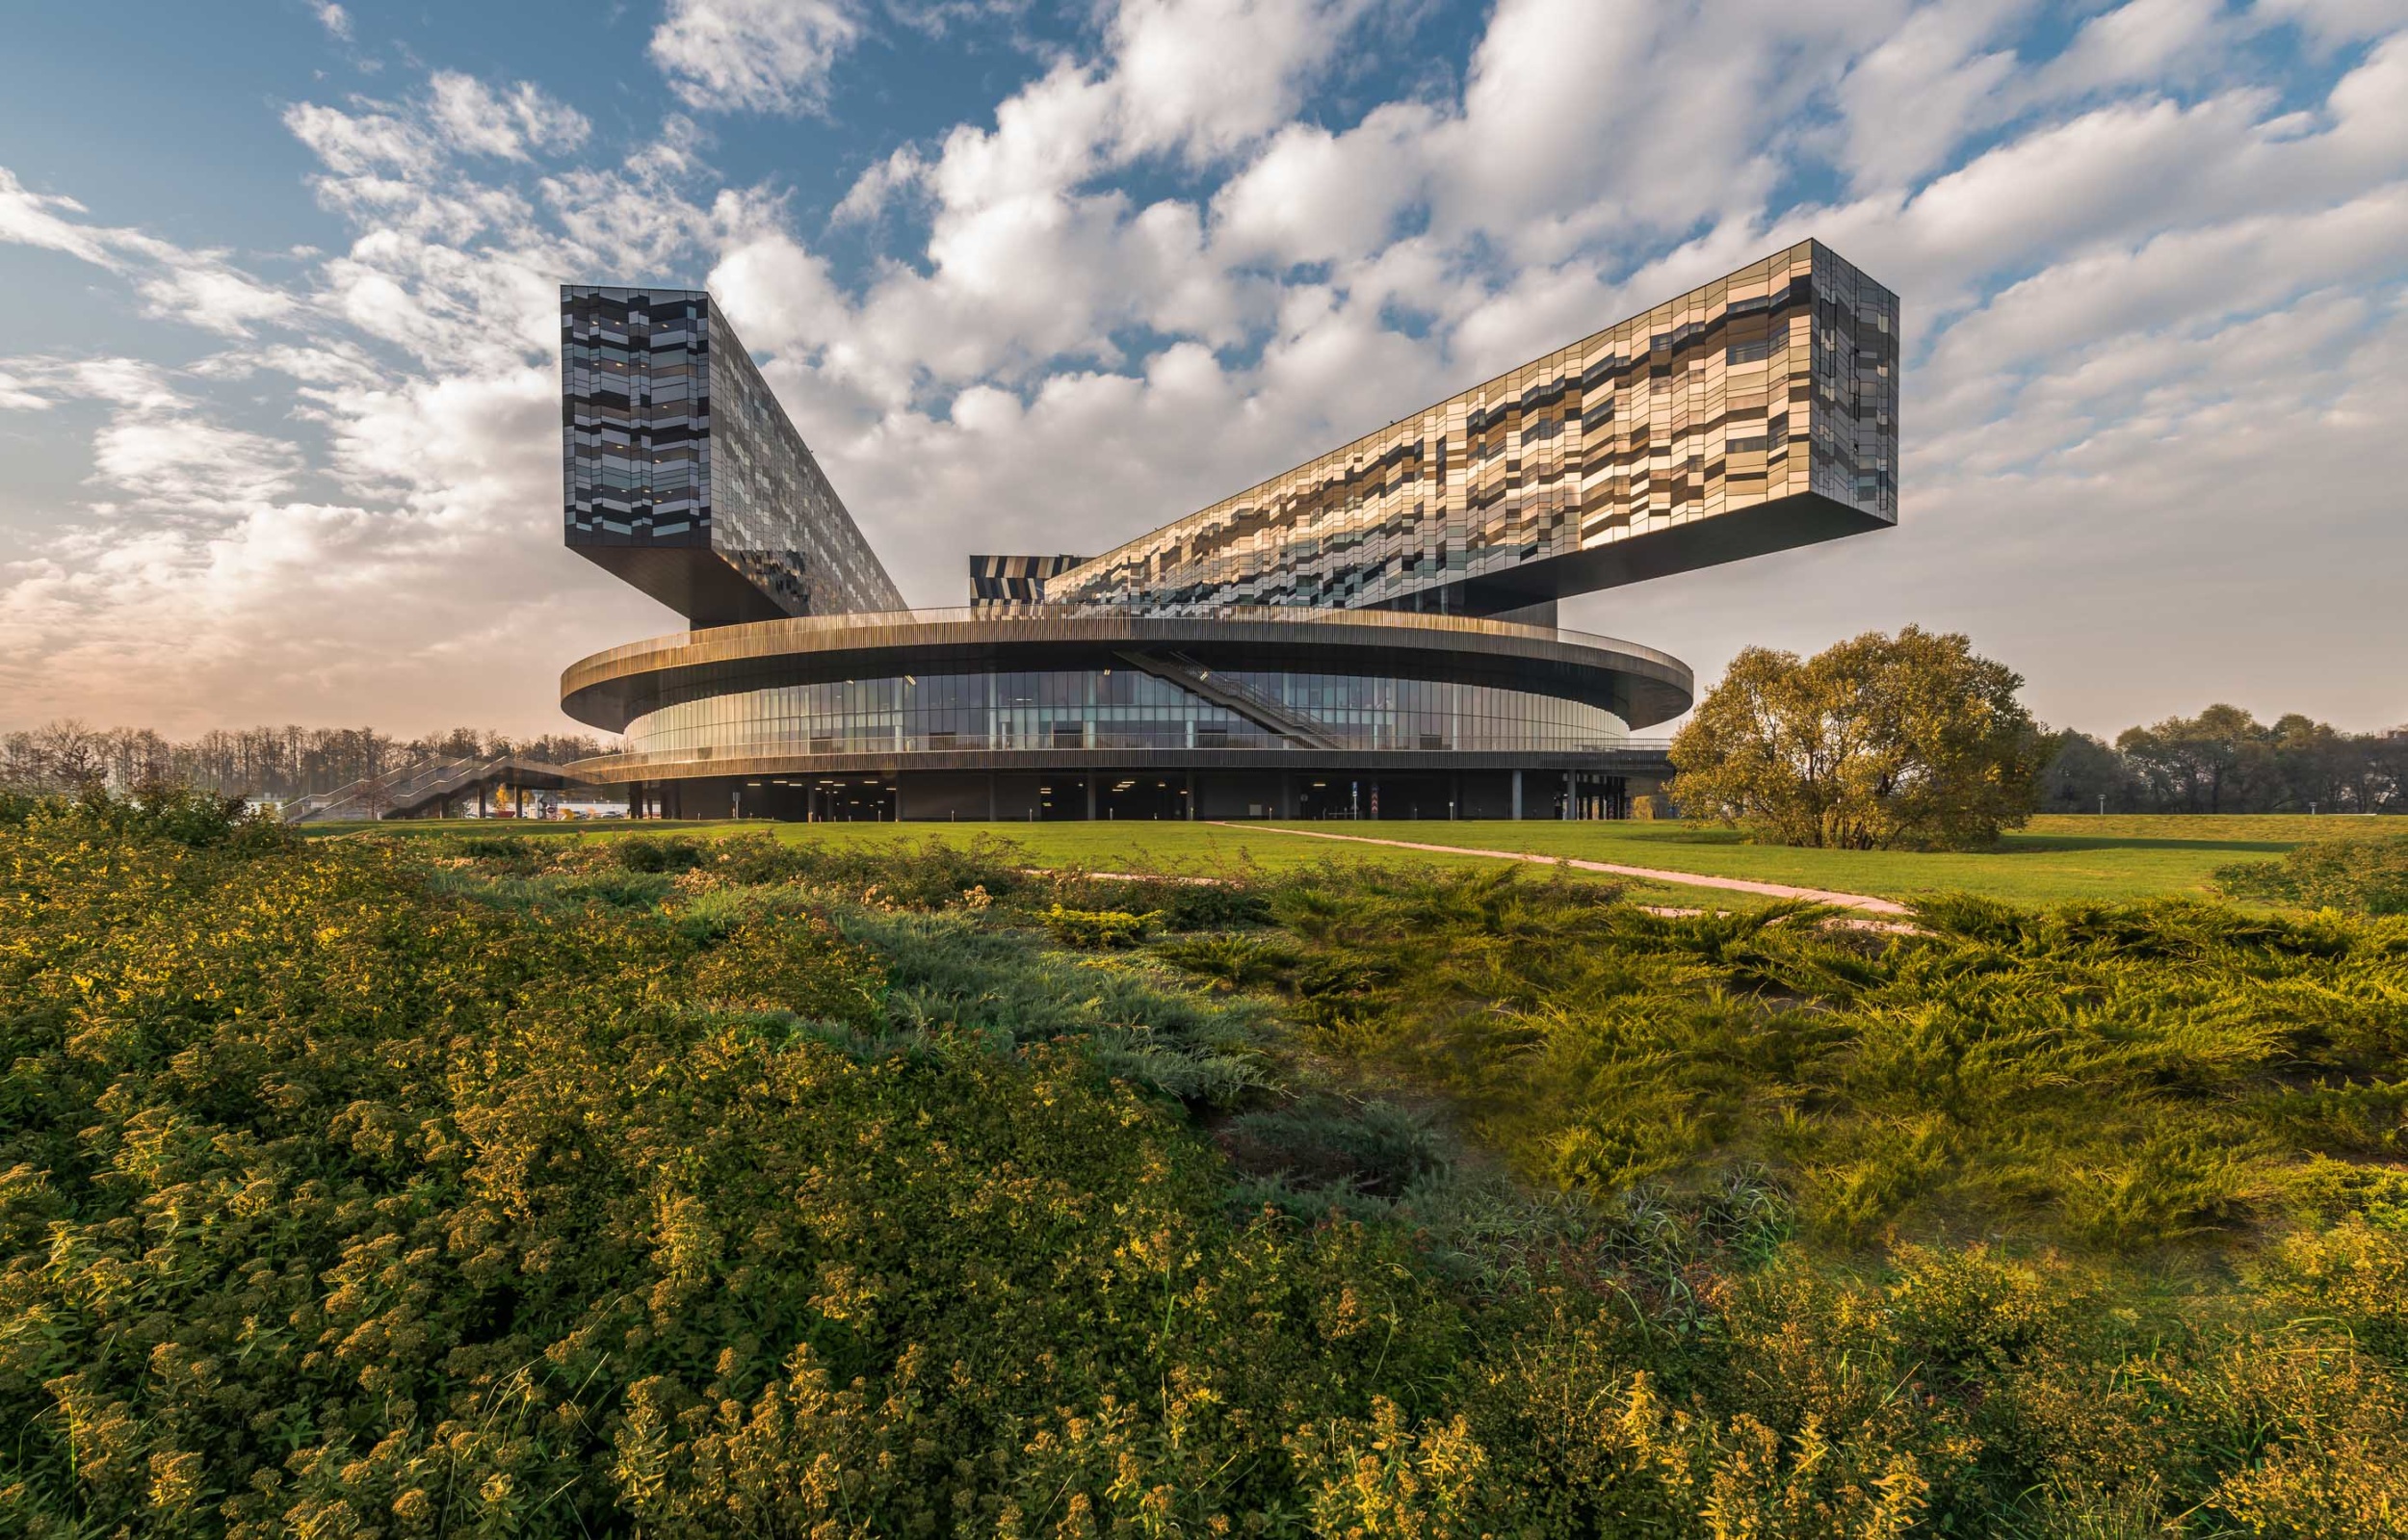 Moscow School of Management SKOLKOVO in Russia